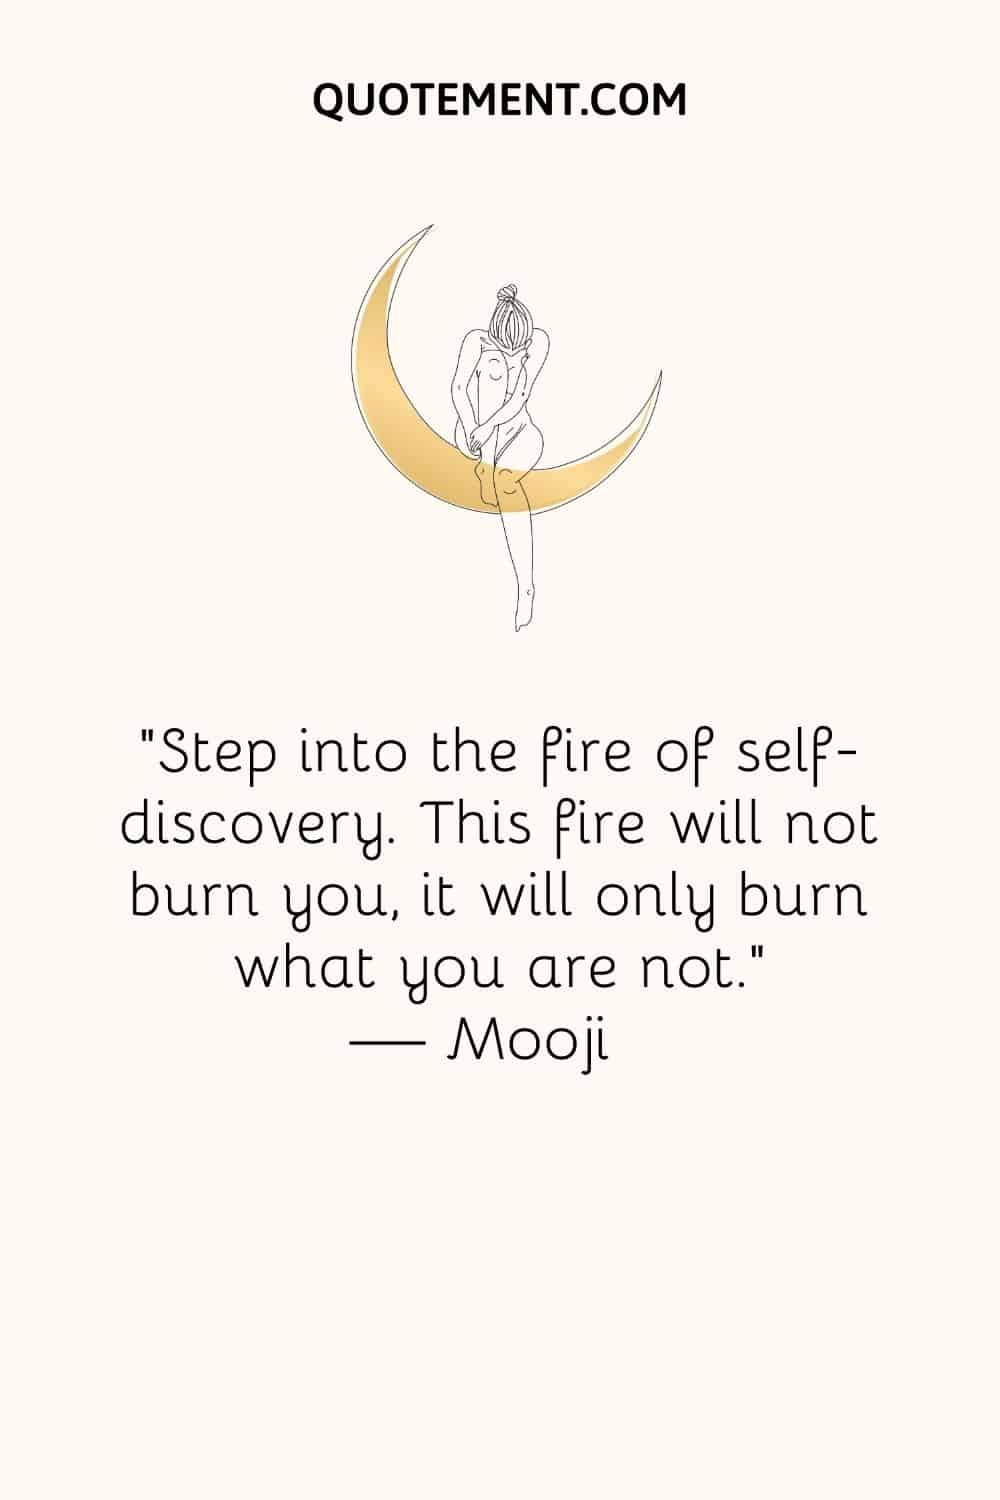 Step into the fire of self-discovery. This fire will not burn you, it will only burn what you are not